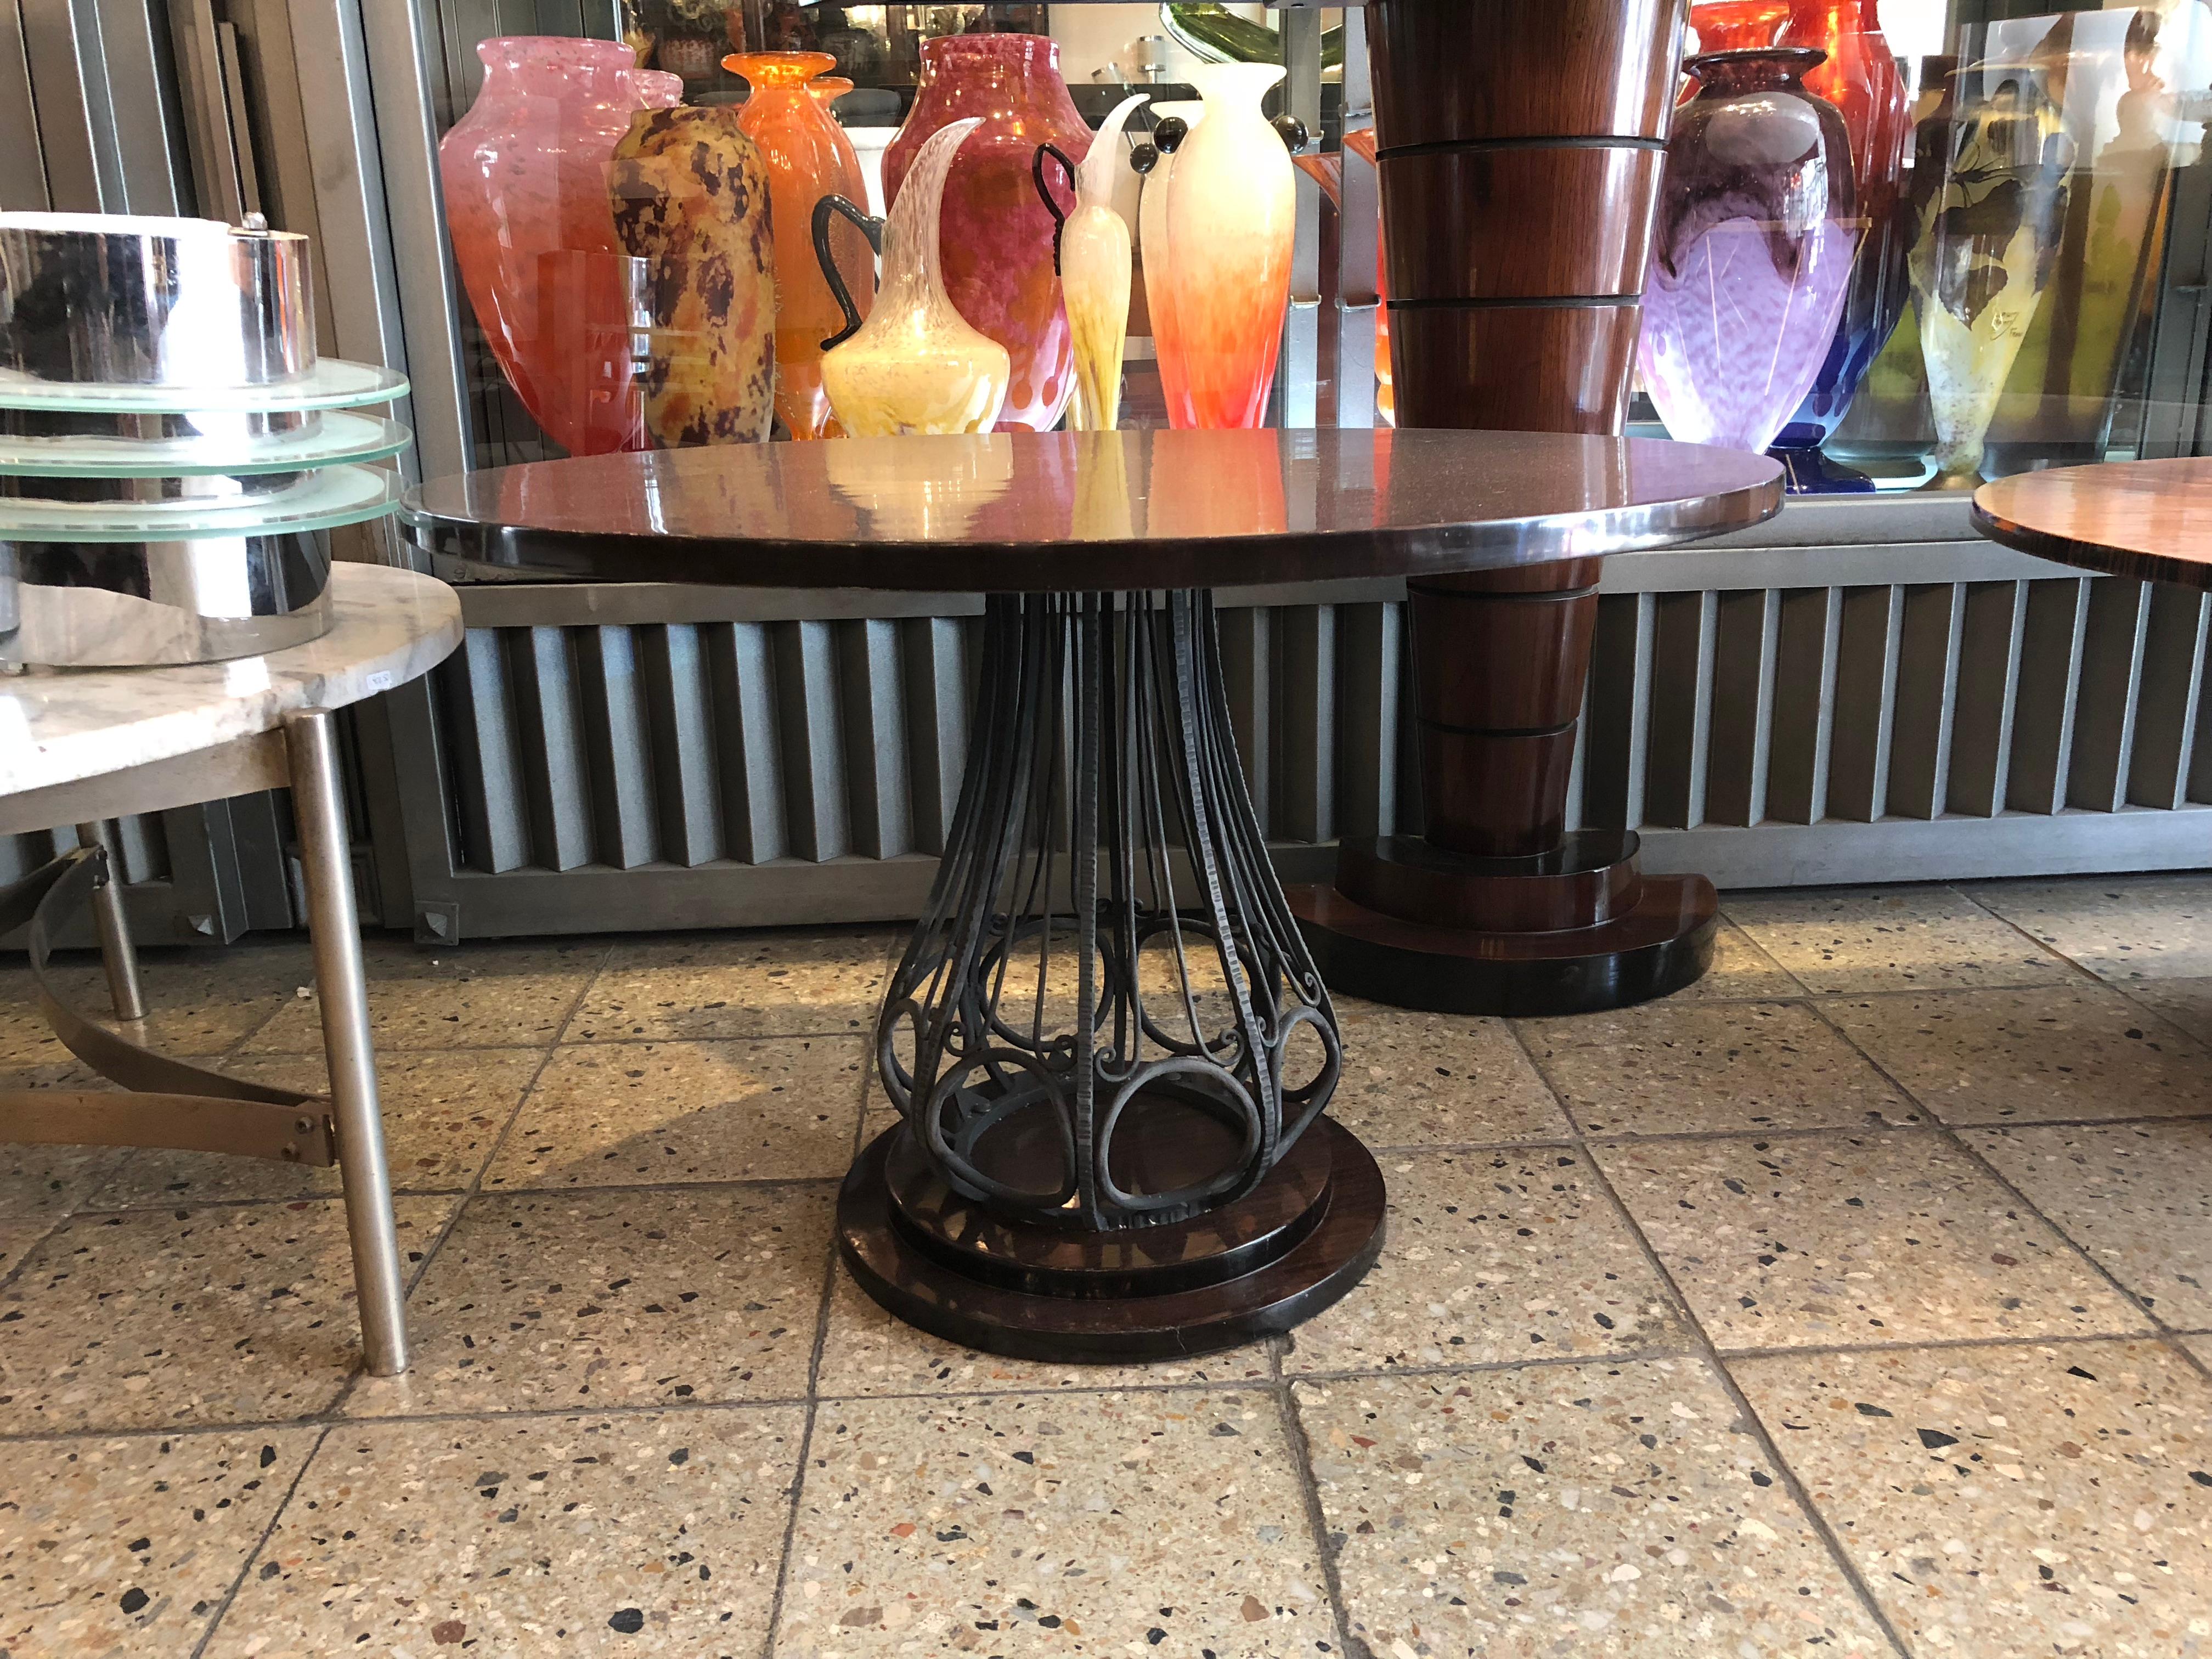 Two tables

Material: wood and iron
Style: Art Deco
Country: France
We have specialized in the sale of Art Deco and Art Nouveau and Vintage styles since 1982. If you have any questions we are at your disposal.
Pushing the button that reads 'View All